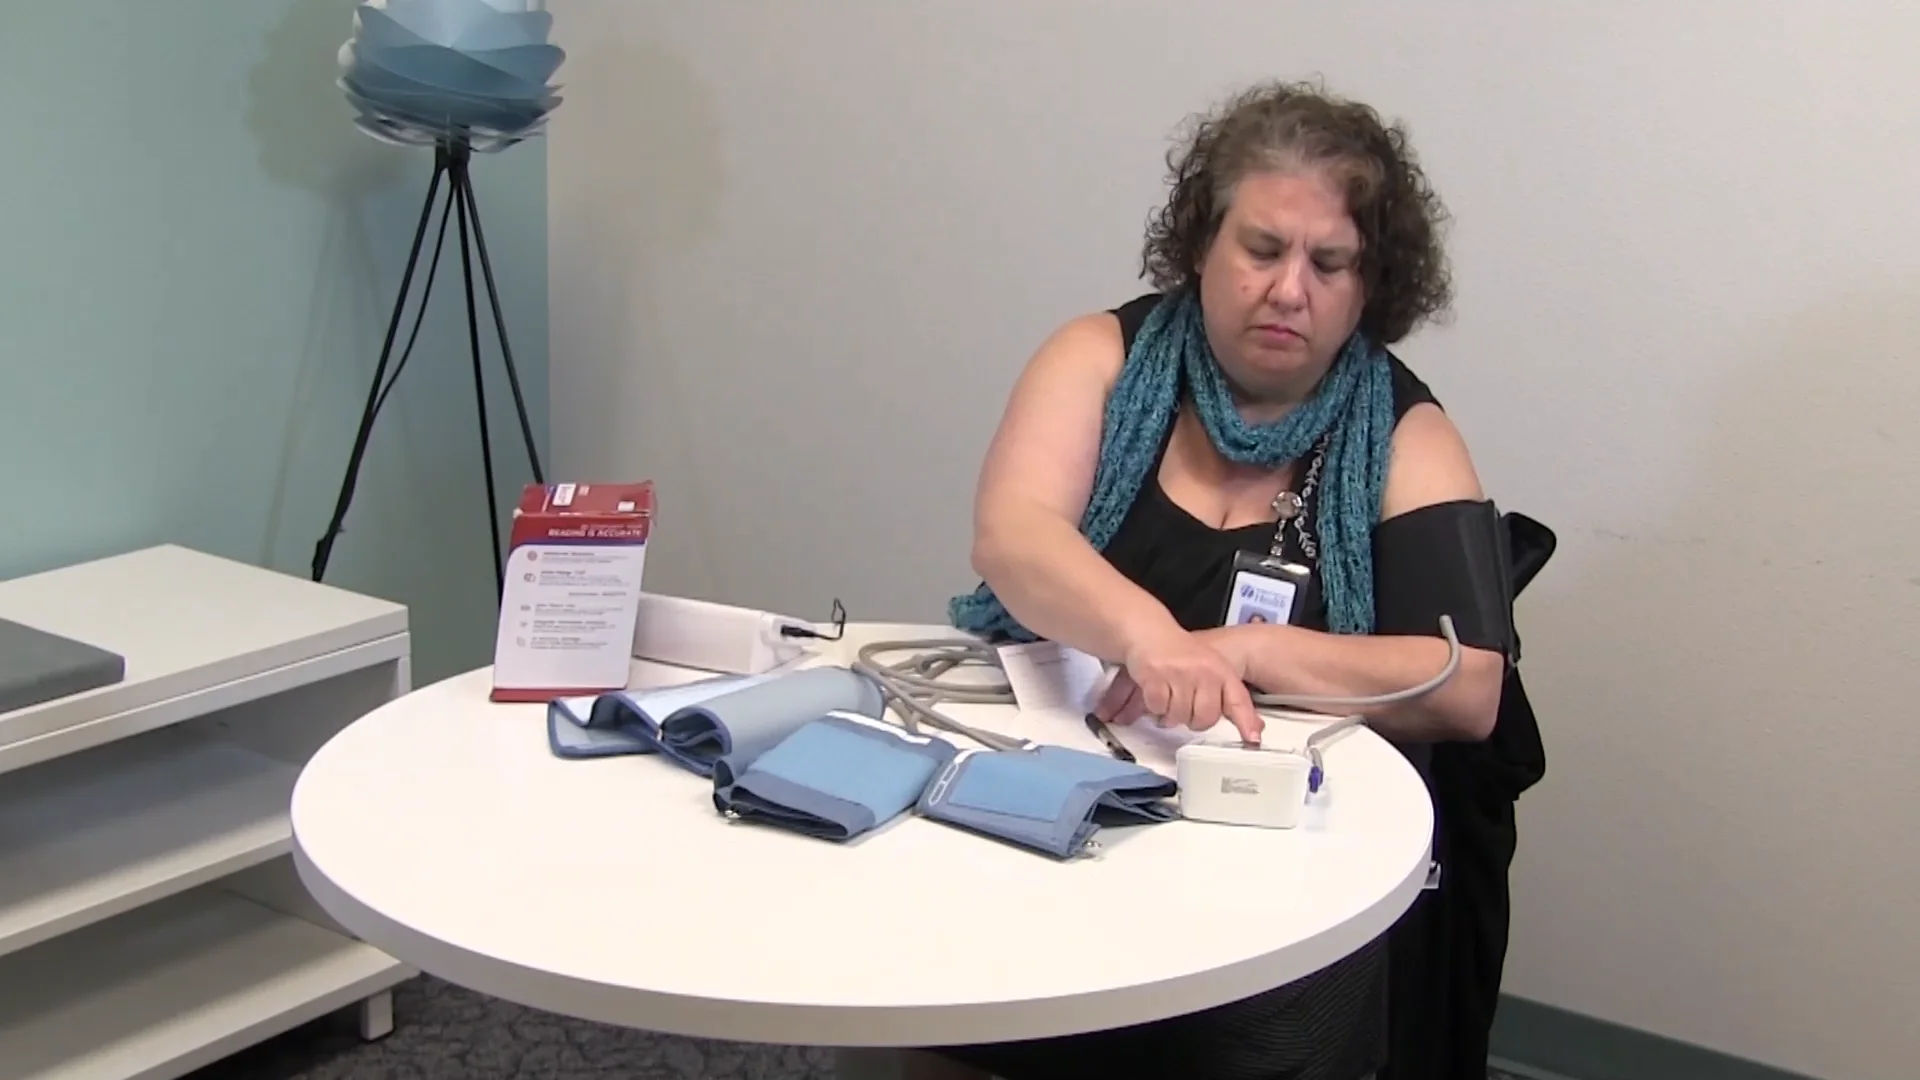 Getting an Accurate Blood Pressure Measurement on Vimeo